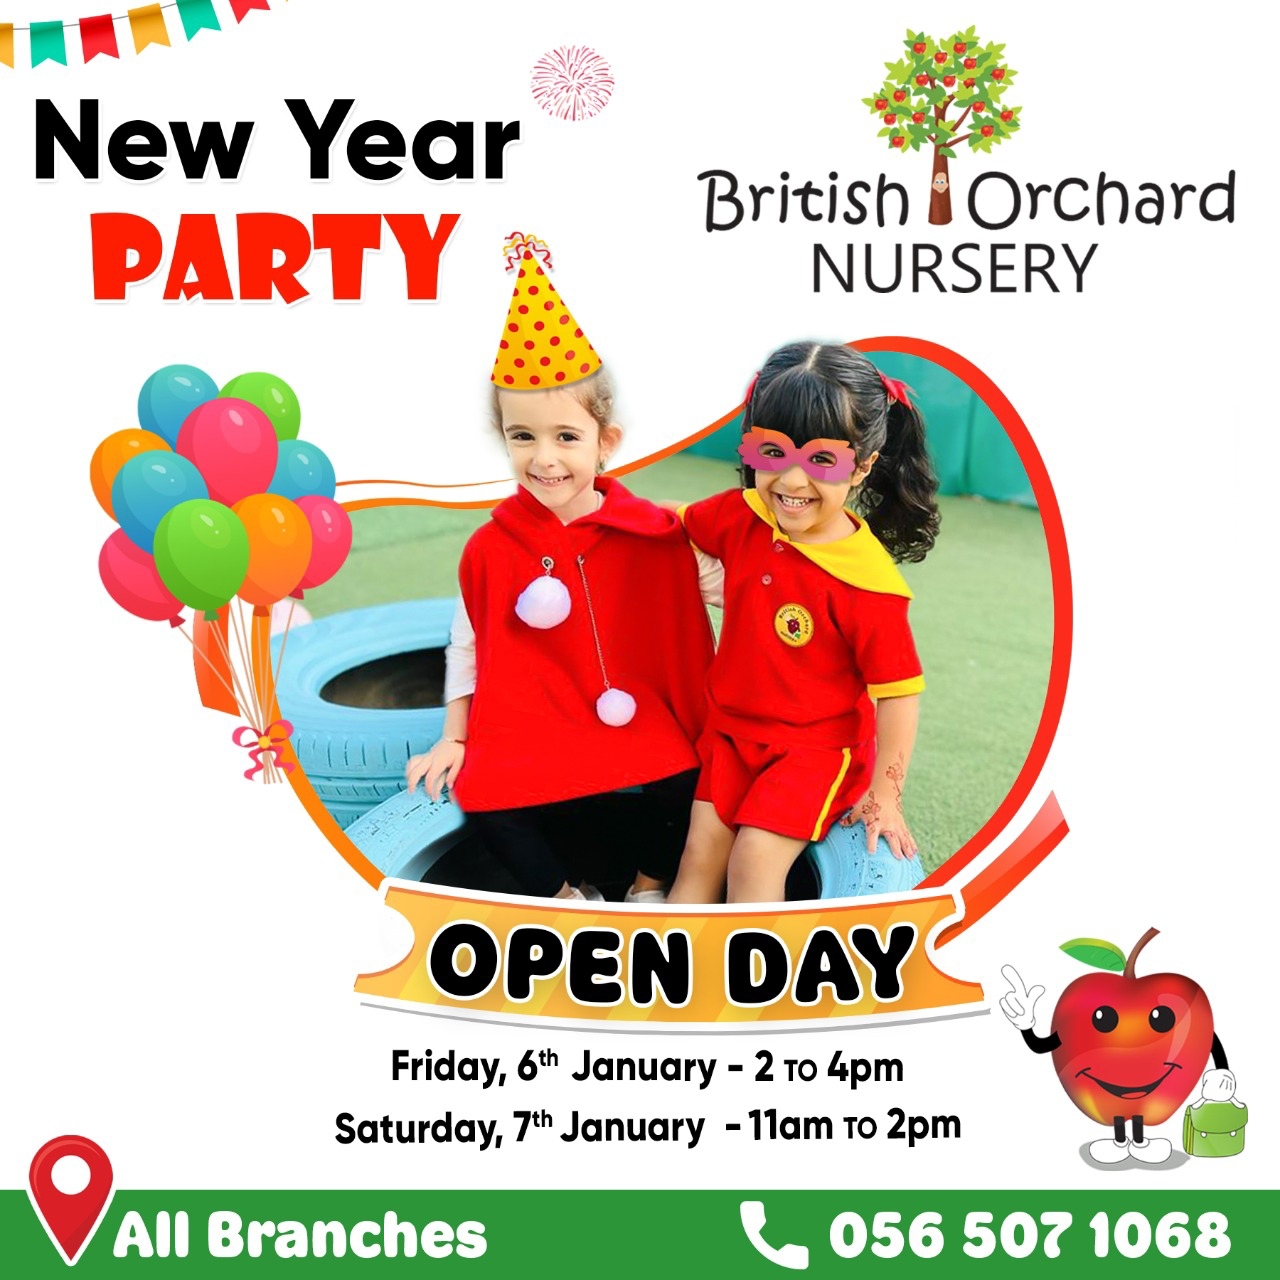 Join us for a New Year Party OPEN DAY 